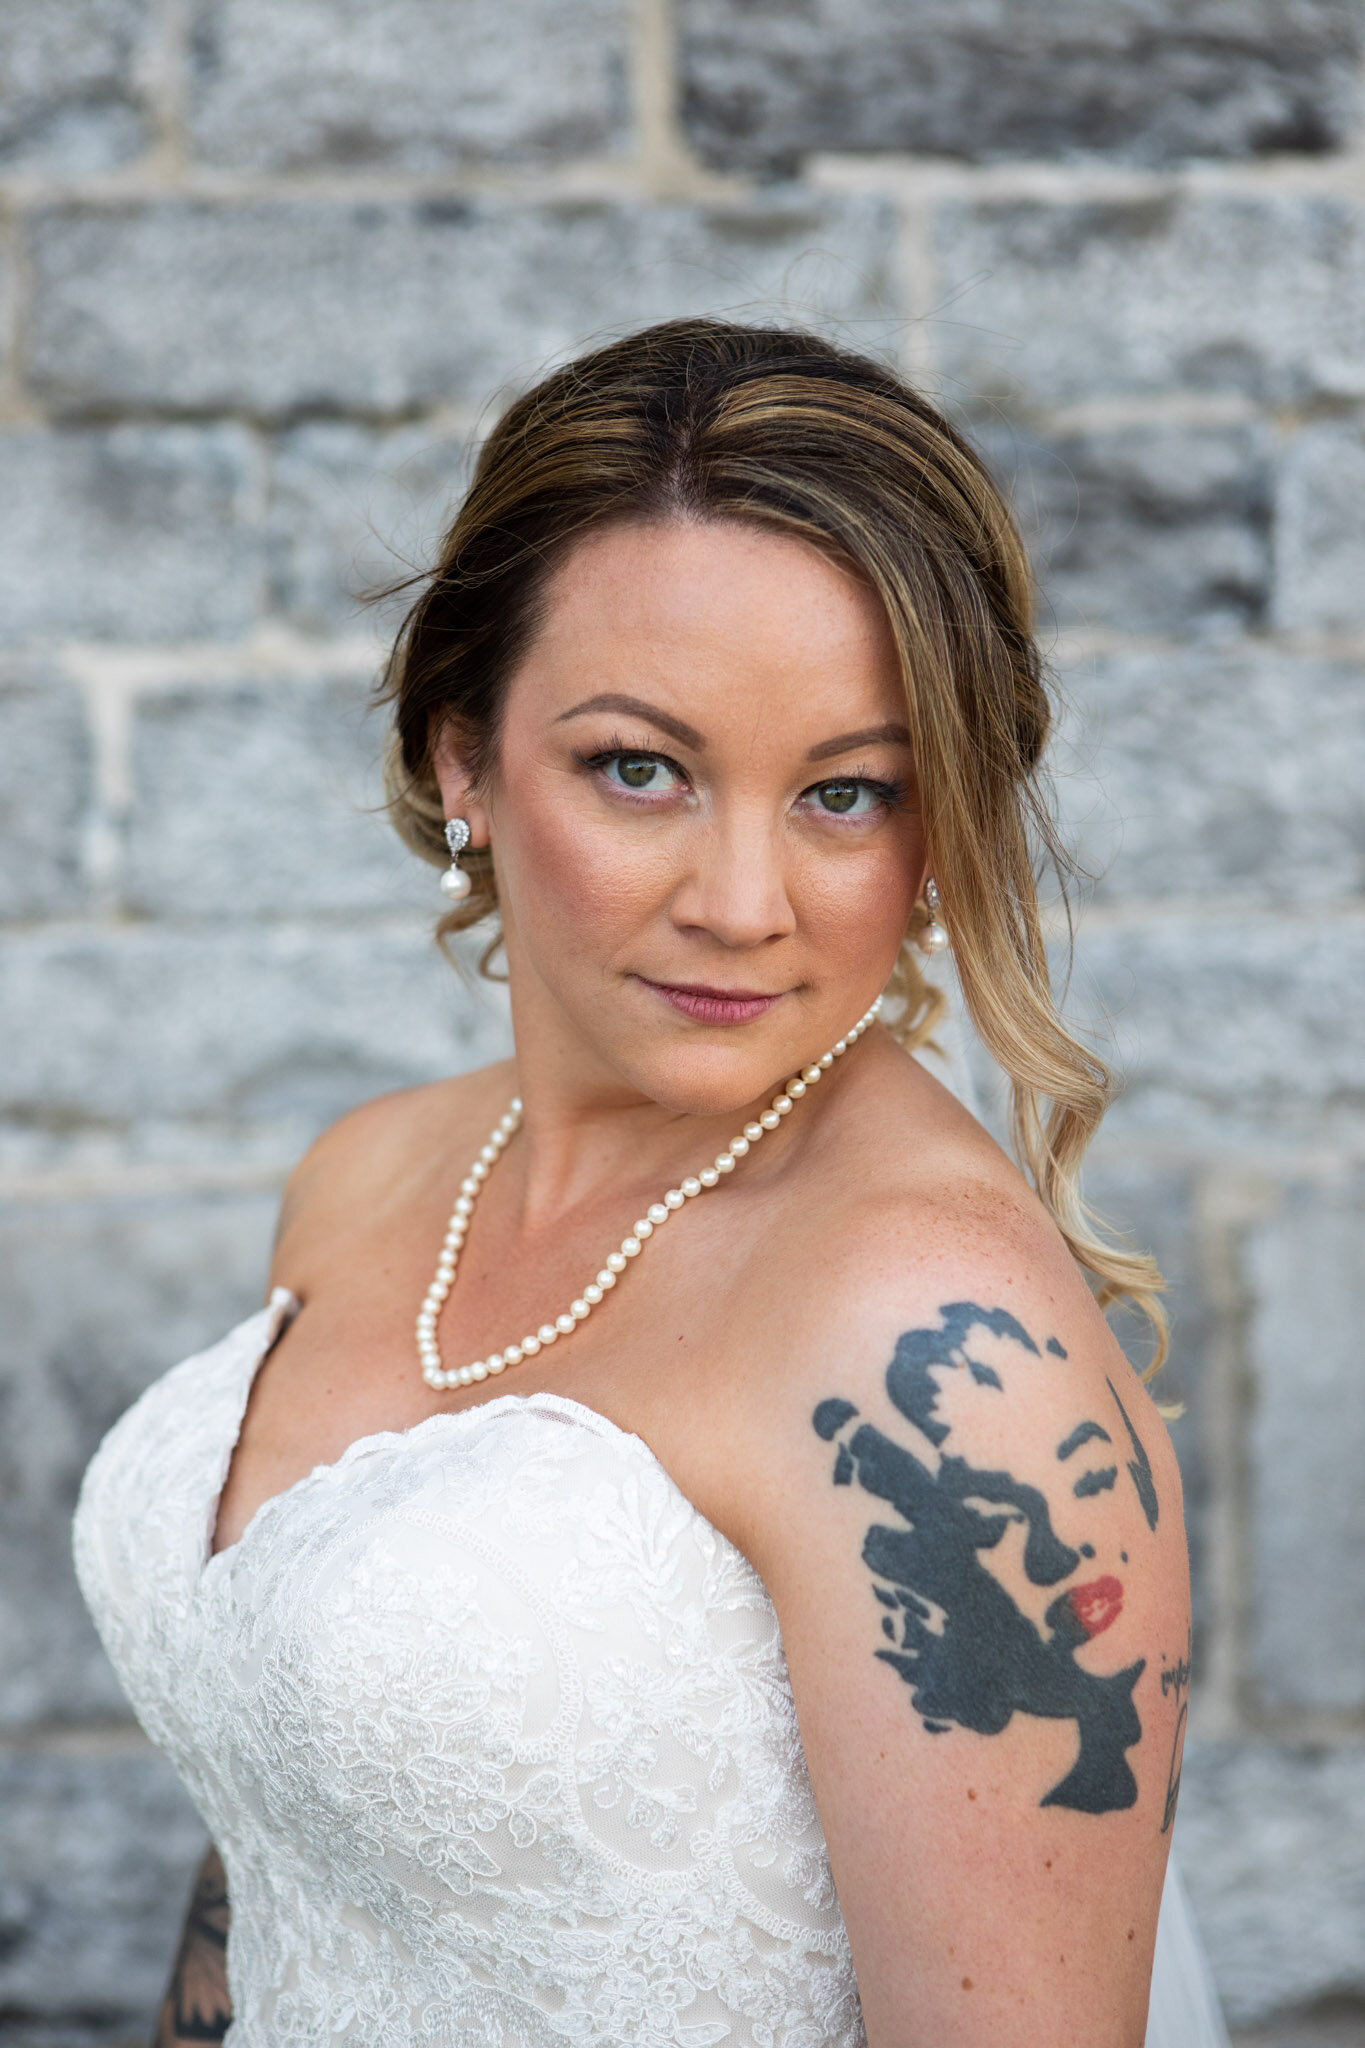 tattooed bridal portrait with pearls with stone wall of St Raphael's ruins in the background.jpg